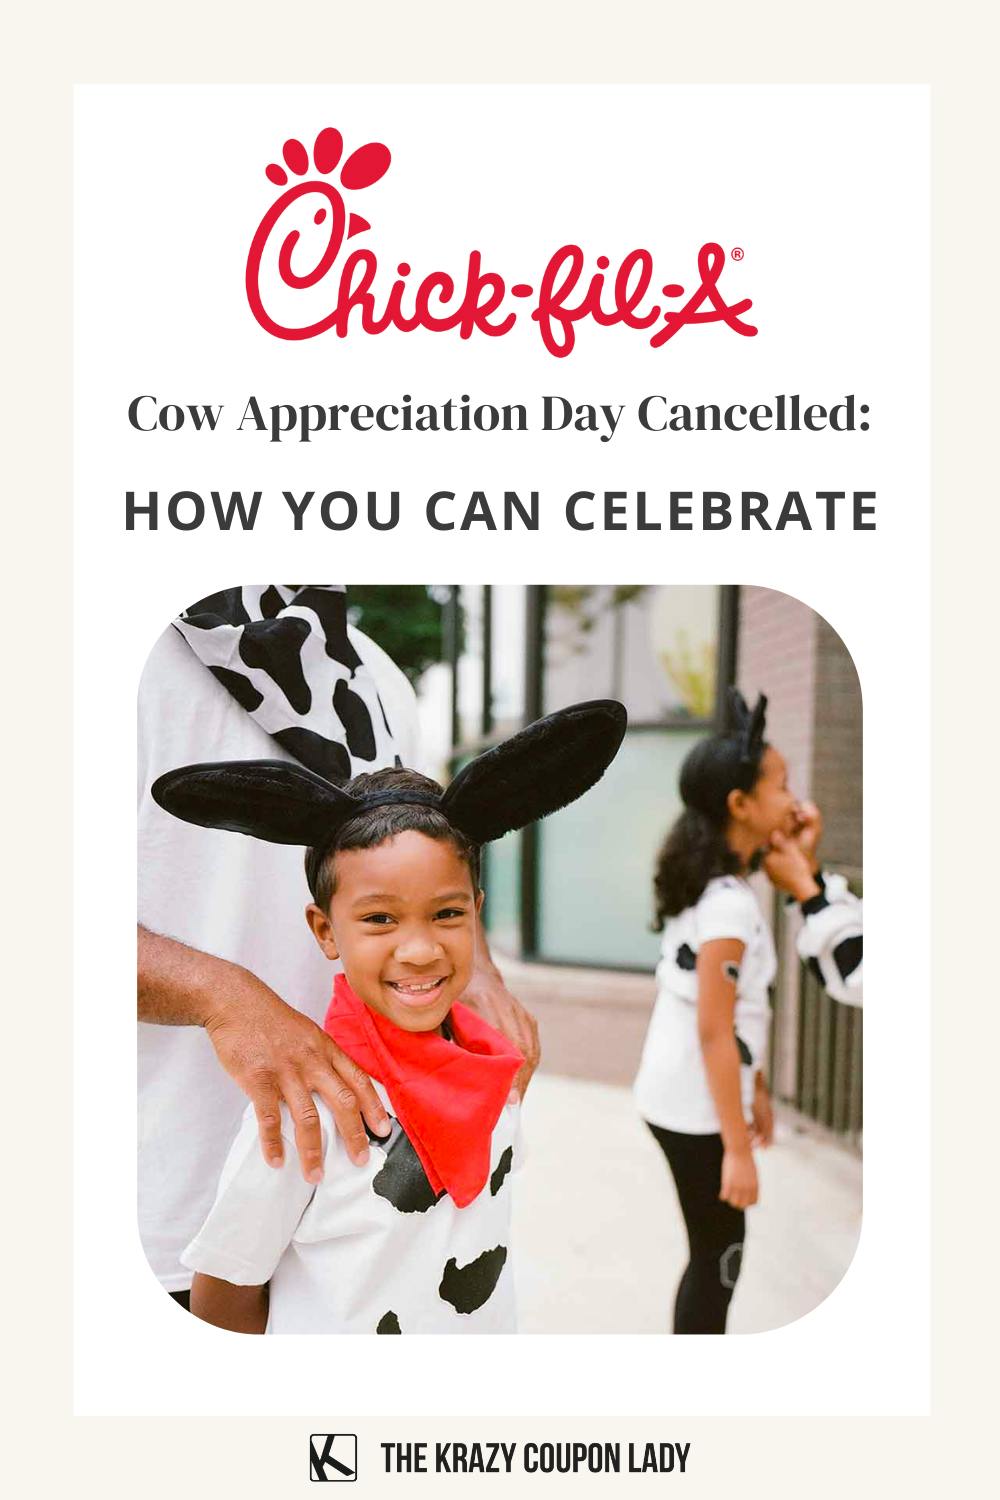 Chick-fil-A Cow Appreciation Day 2022 Cancelled: How You Can Celebrate